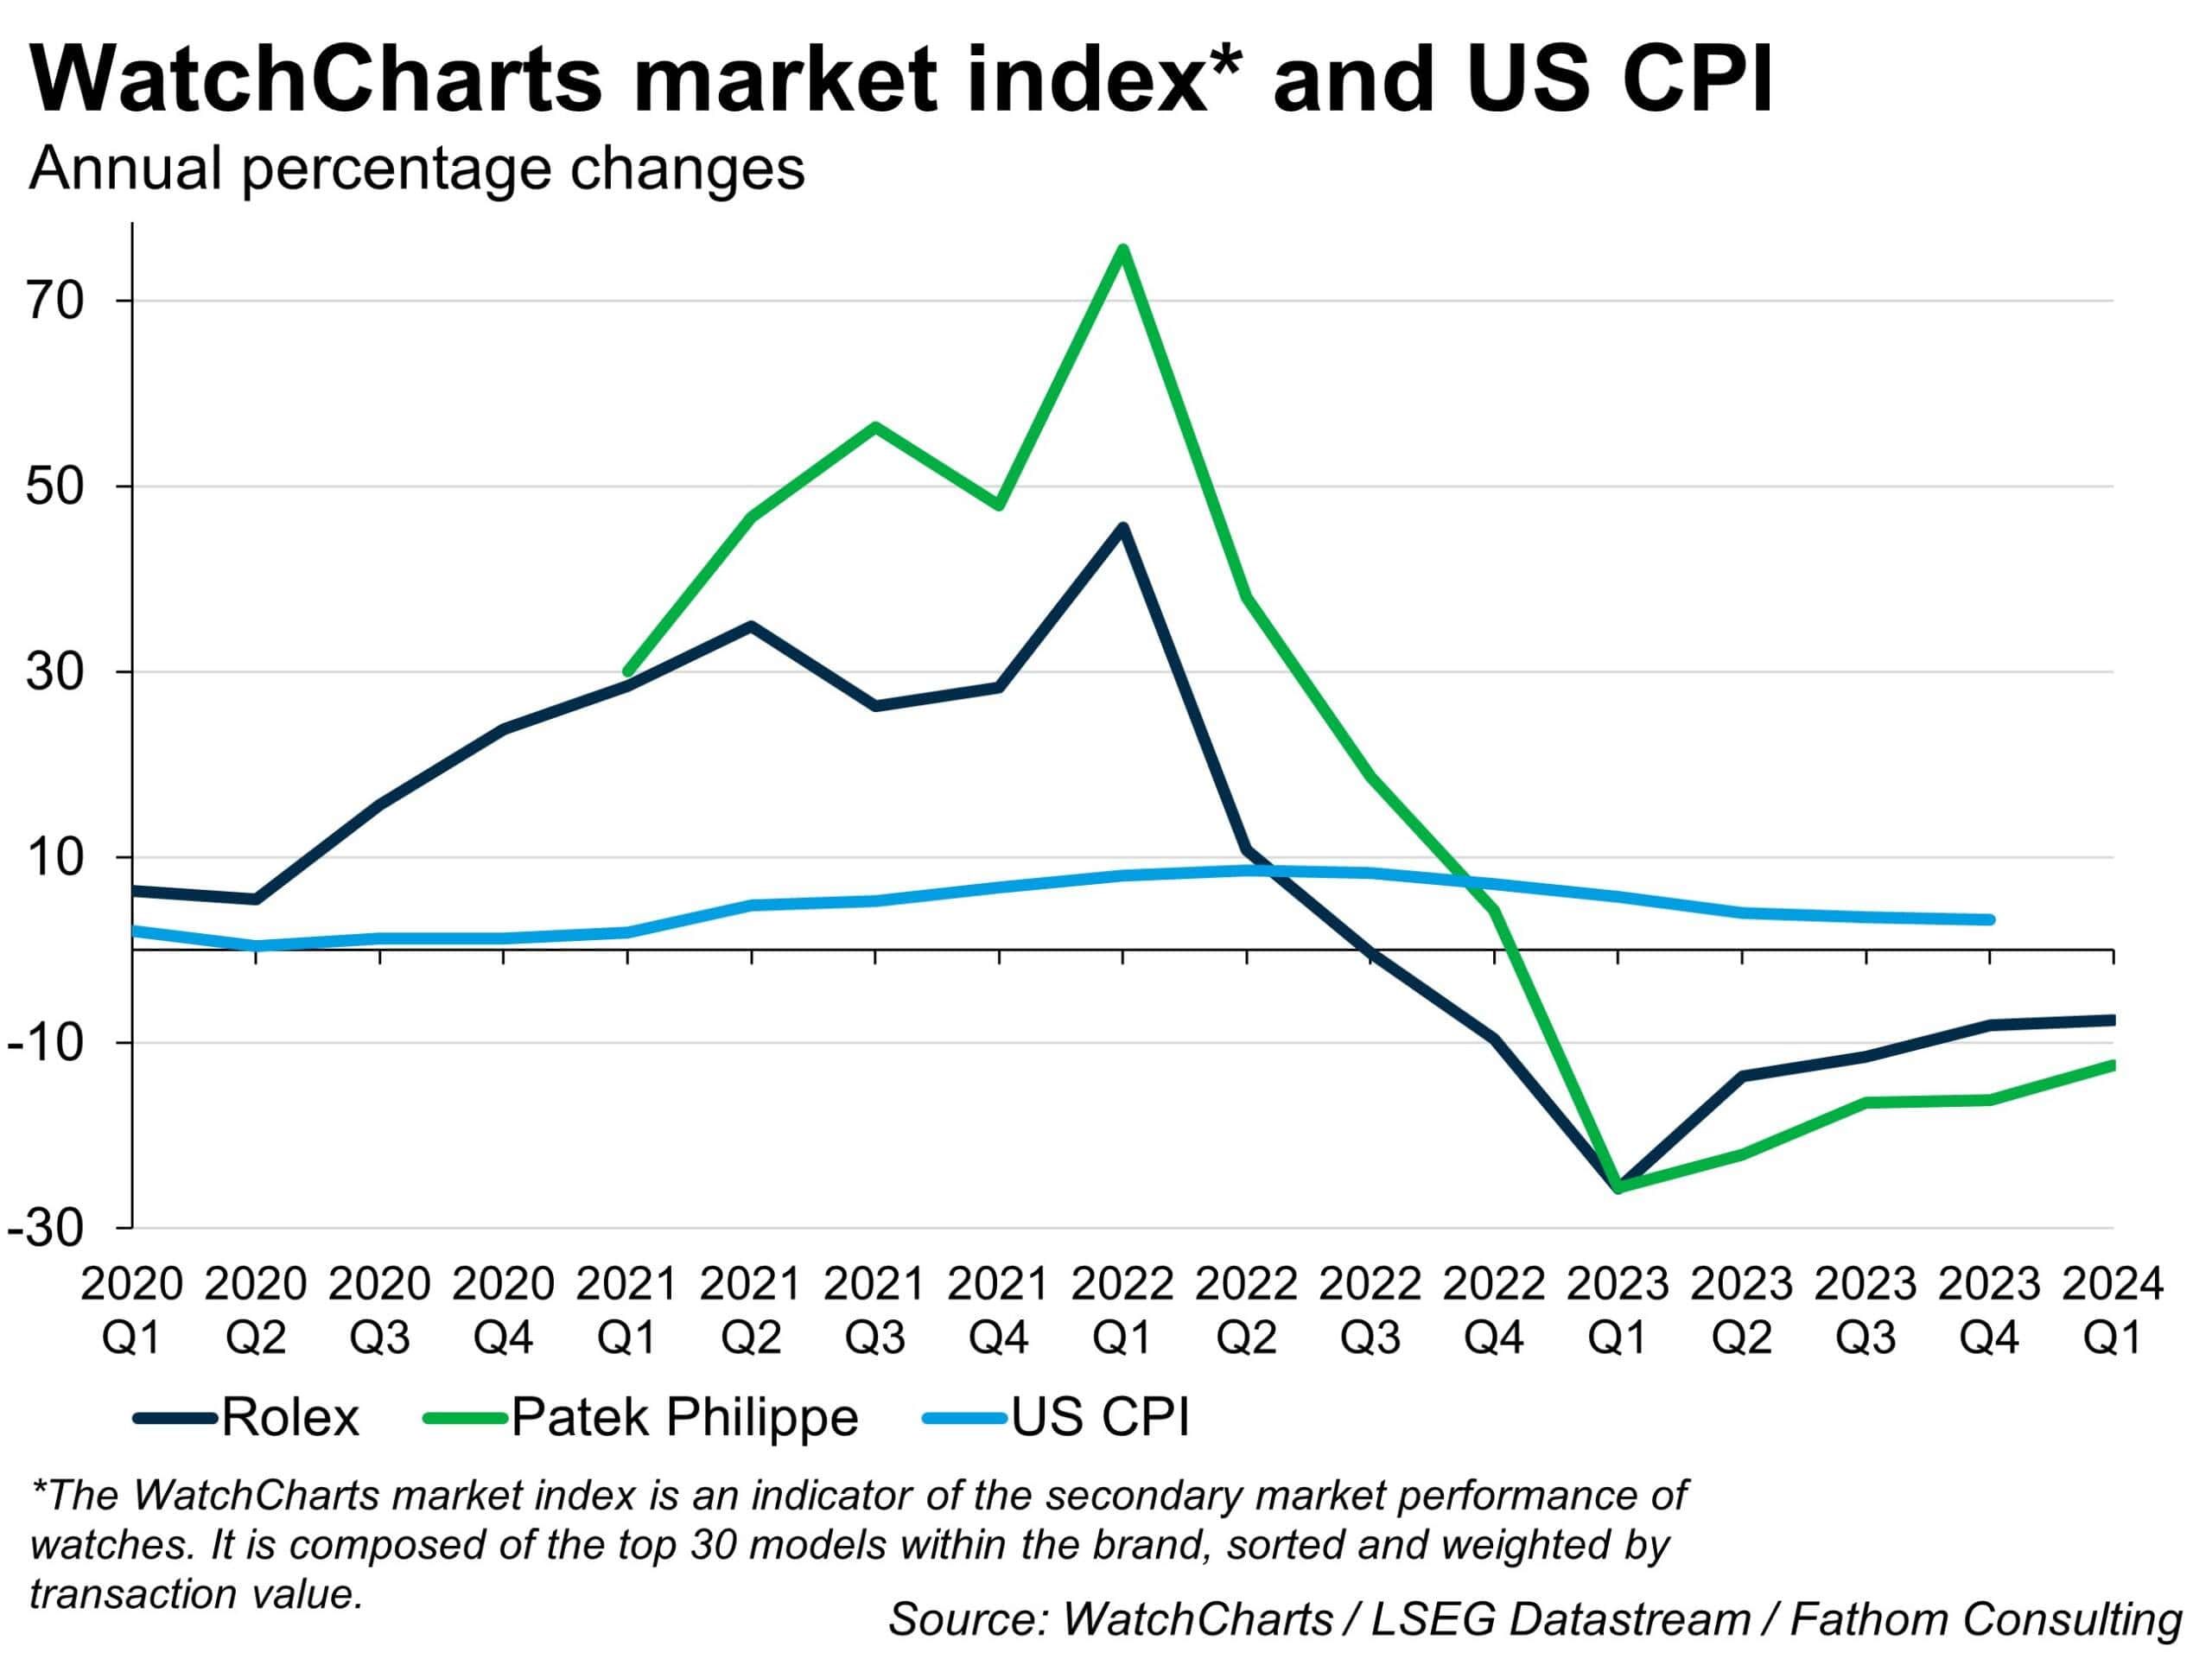 WatchCharts market index and US CPI, annual percentage changes